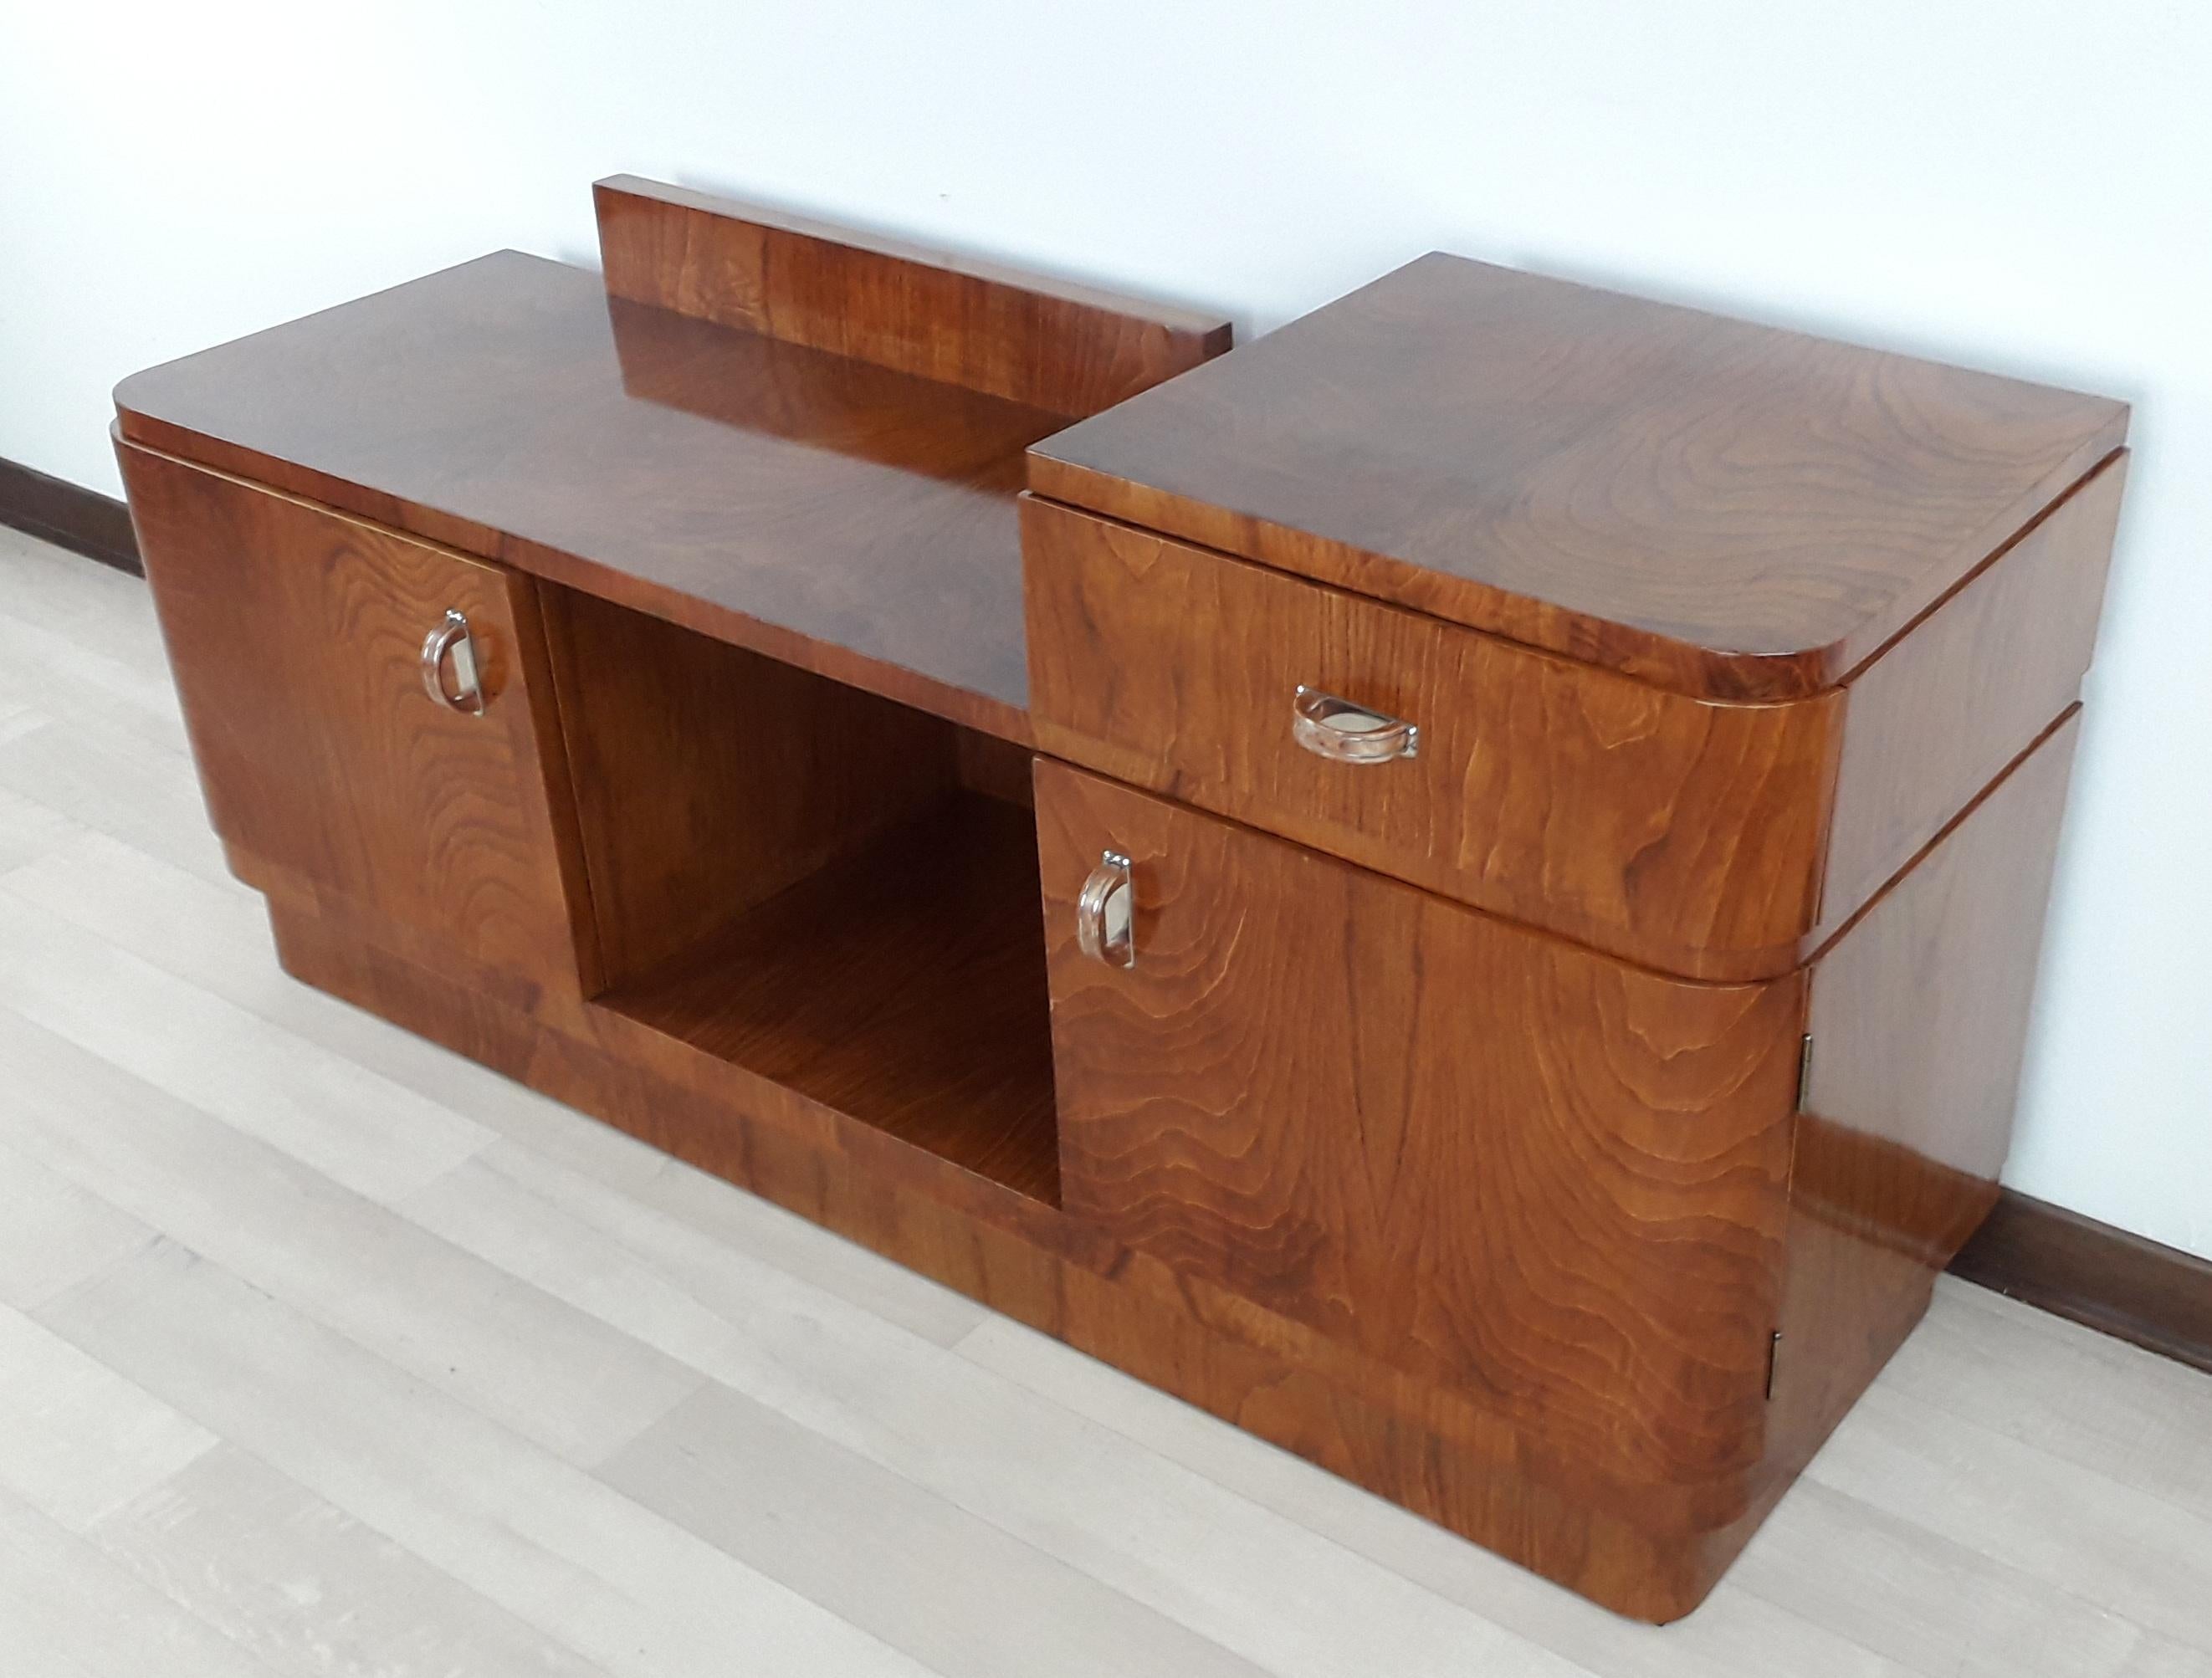 Stunning Milanese Art Dèco vanity made entirely of Oak and Oak Burl.
Stainless steel and Bakelite handles.
Collected from a haute couture Atelier in Milan where it was used as stage furniture.
Restored by shellac both internally and externally to